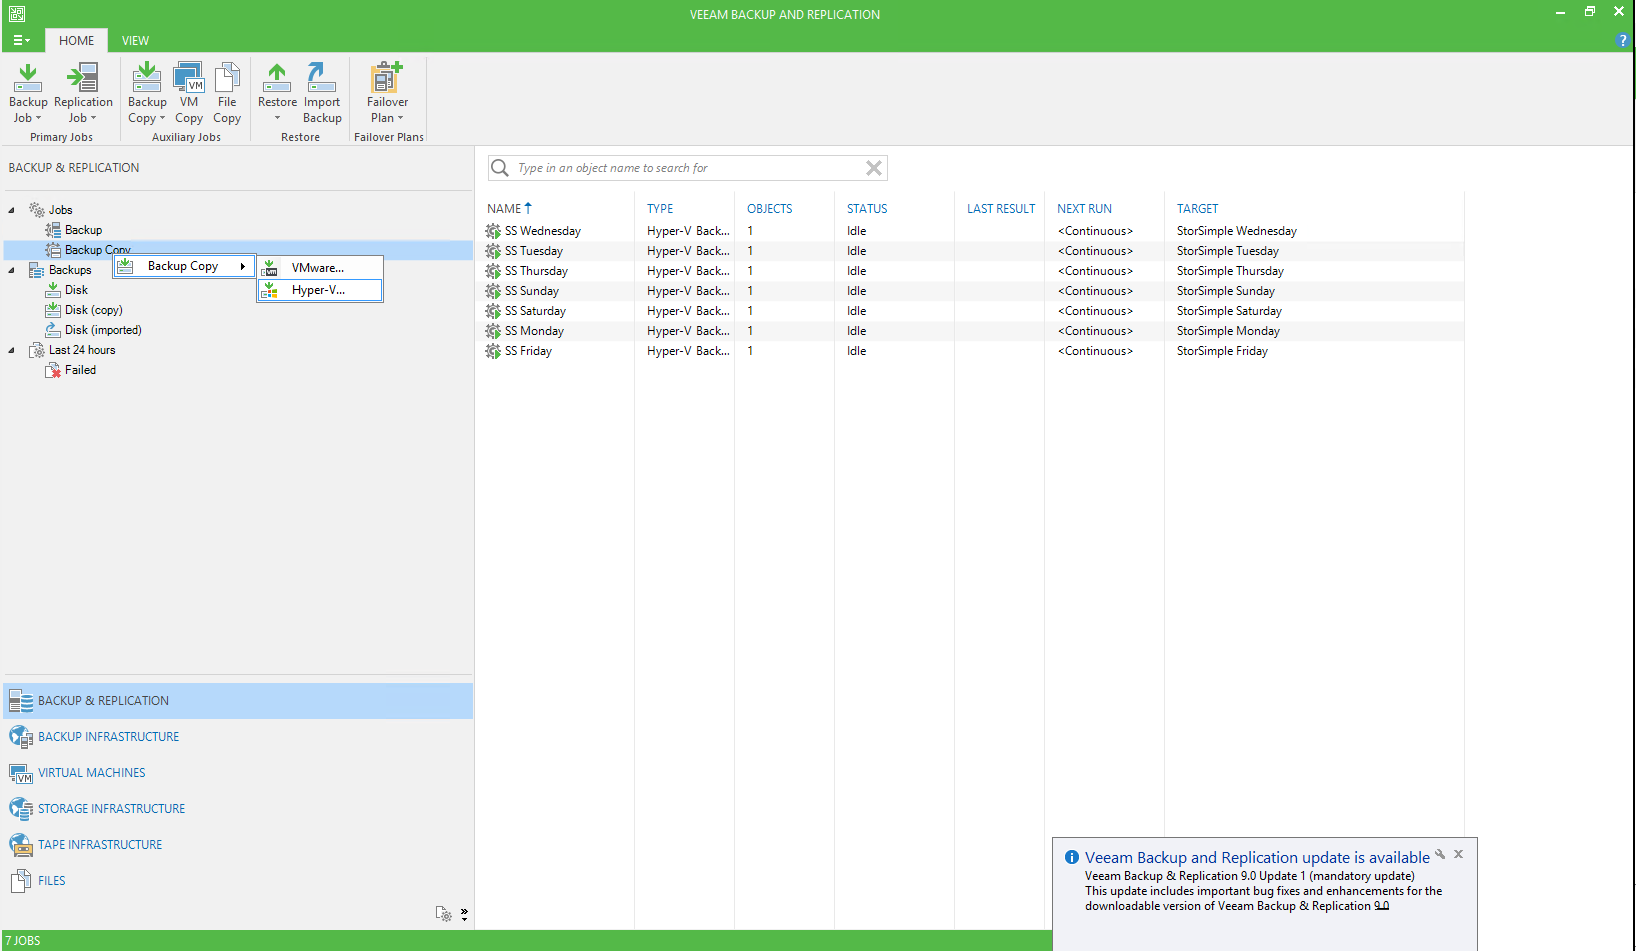 veeam backup failed to install guest agent control